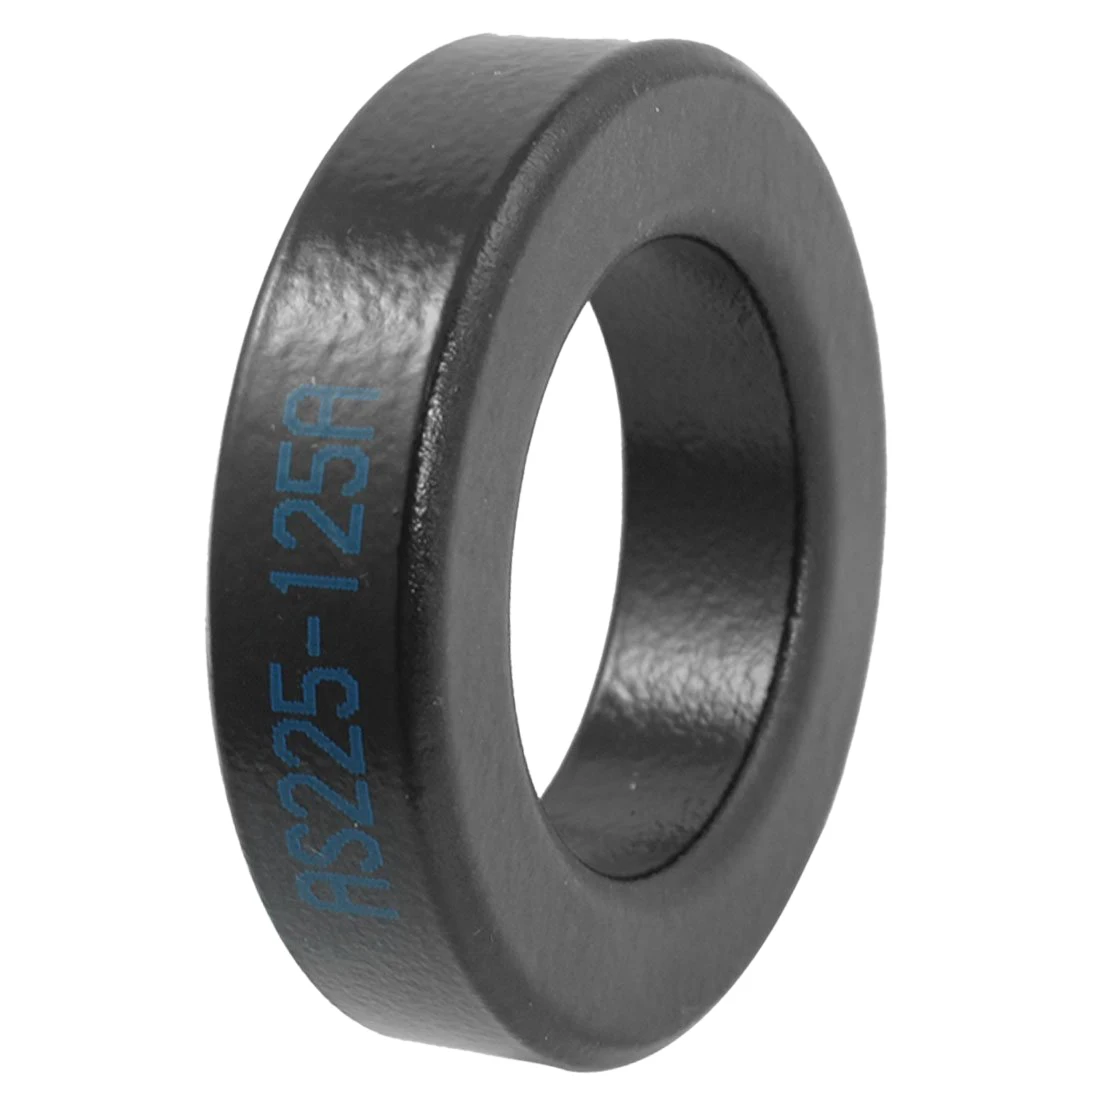 AS225-125A ferrite rings, toroidal cores in black iron for electrical inductors